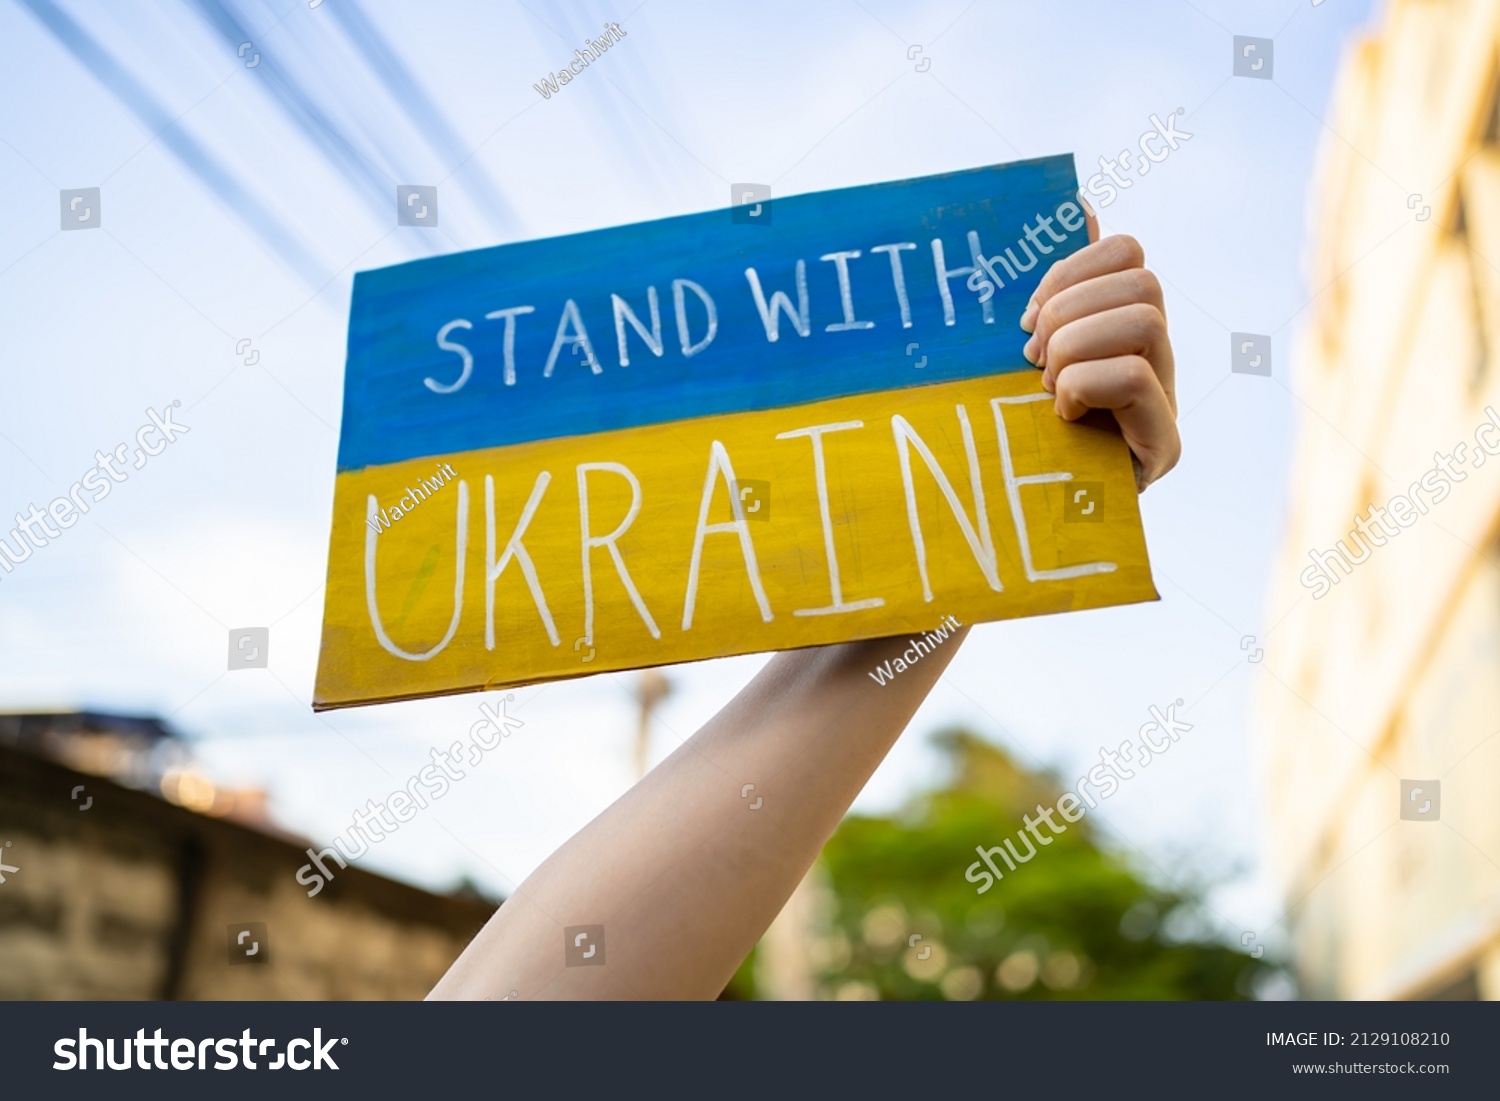 Demonstrator holding "Stand with Ukraine" placard #2129108210